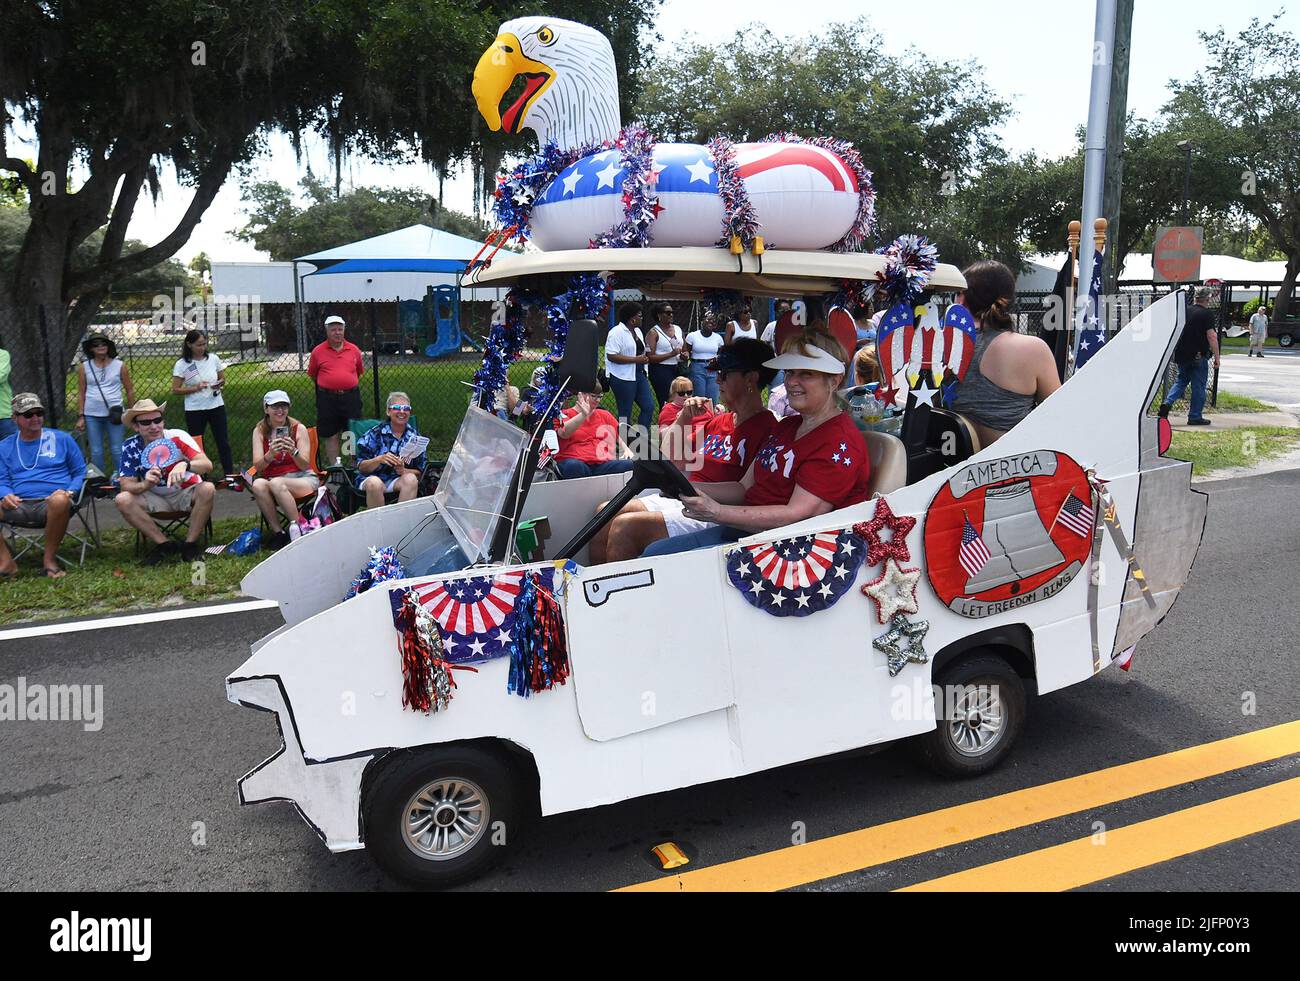 Geneva, United States. 04th July, 2022. People drive a decorated car in the  annual Fourth of July parade in Geneva. The yearly celebration included an  antique car show, a vintage aircraft flyover,